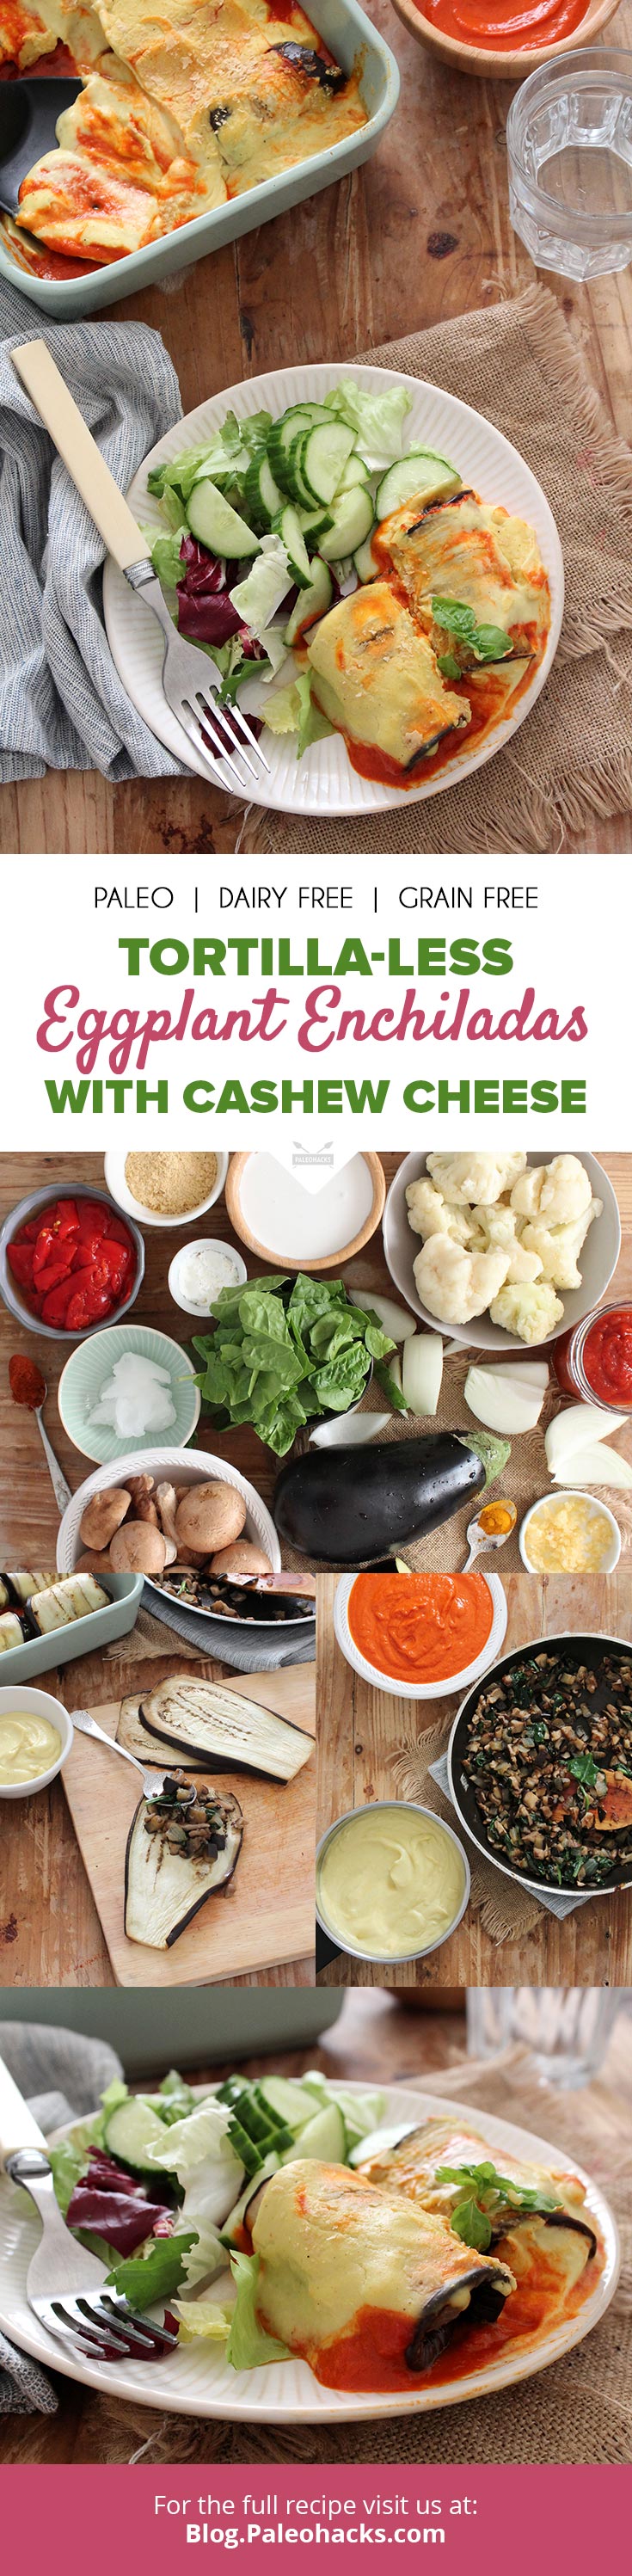 Roasted eggplant slices get wrapped around a mushroom filling, covered with a creamy tomato sauce and drenched in cashew cheese for enchiladas.